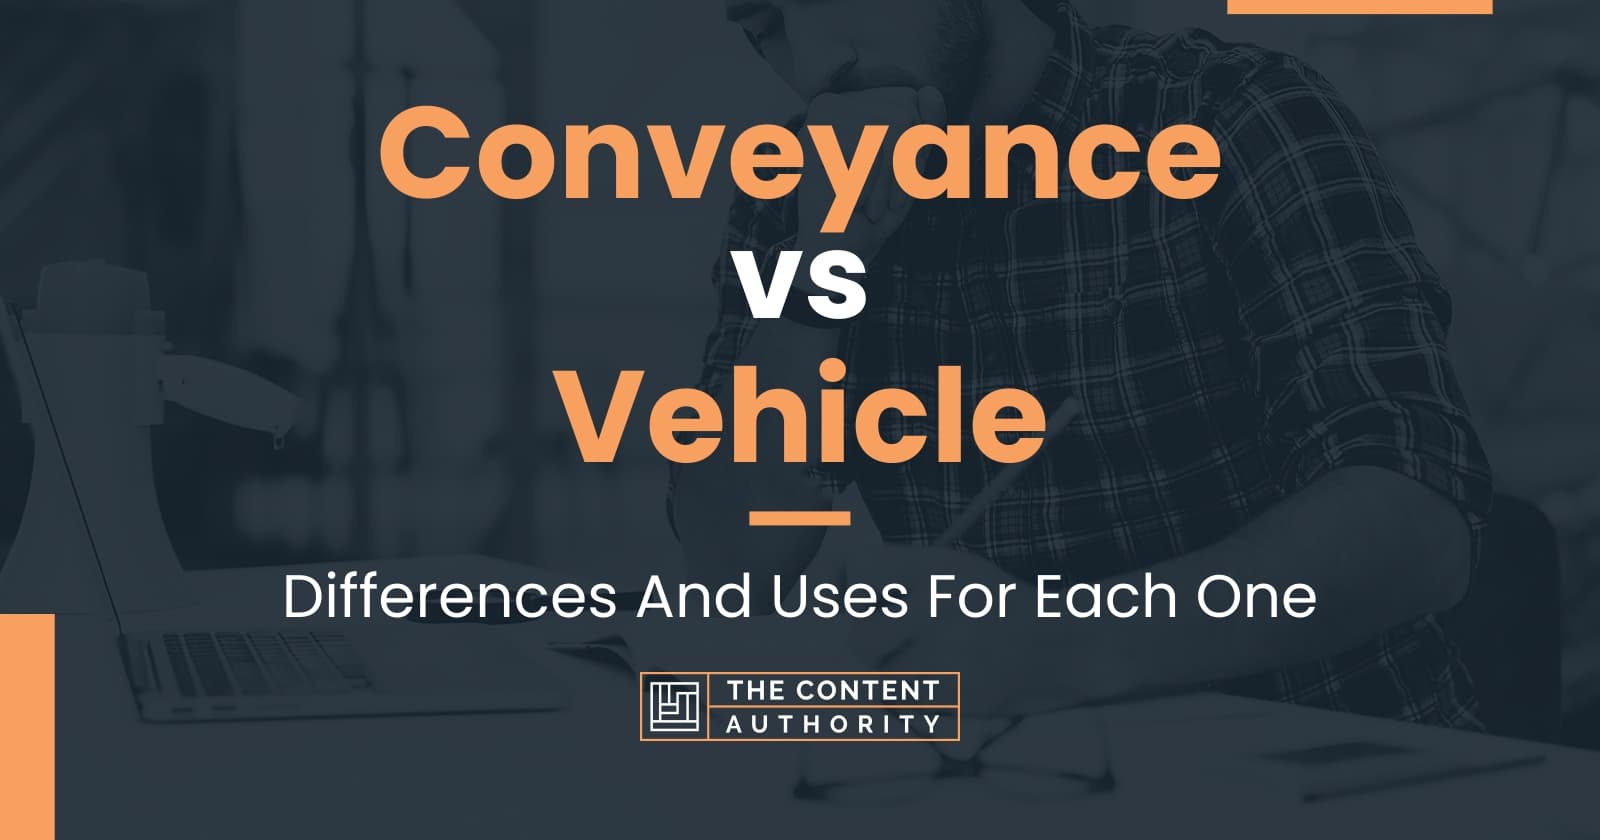 Conveyance vs Vehicle Differences And Uses For Each One